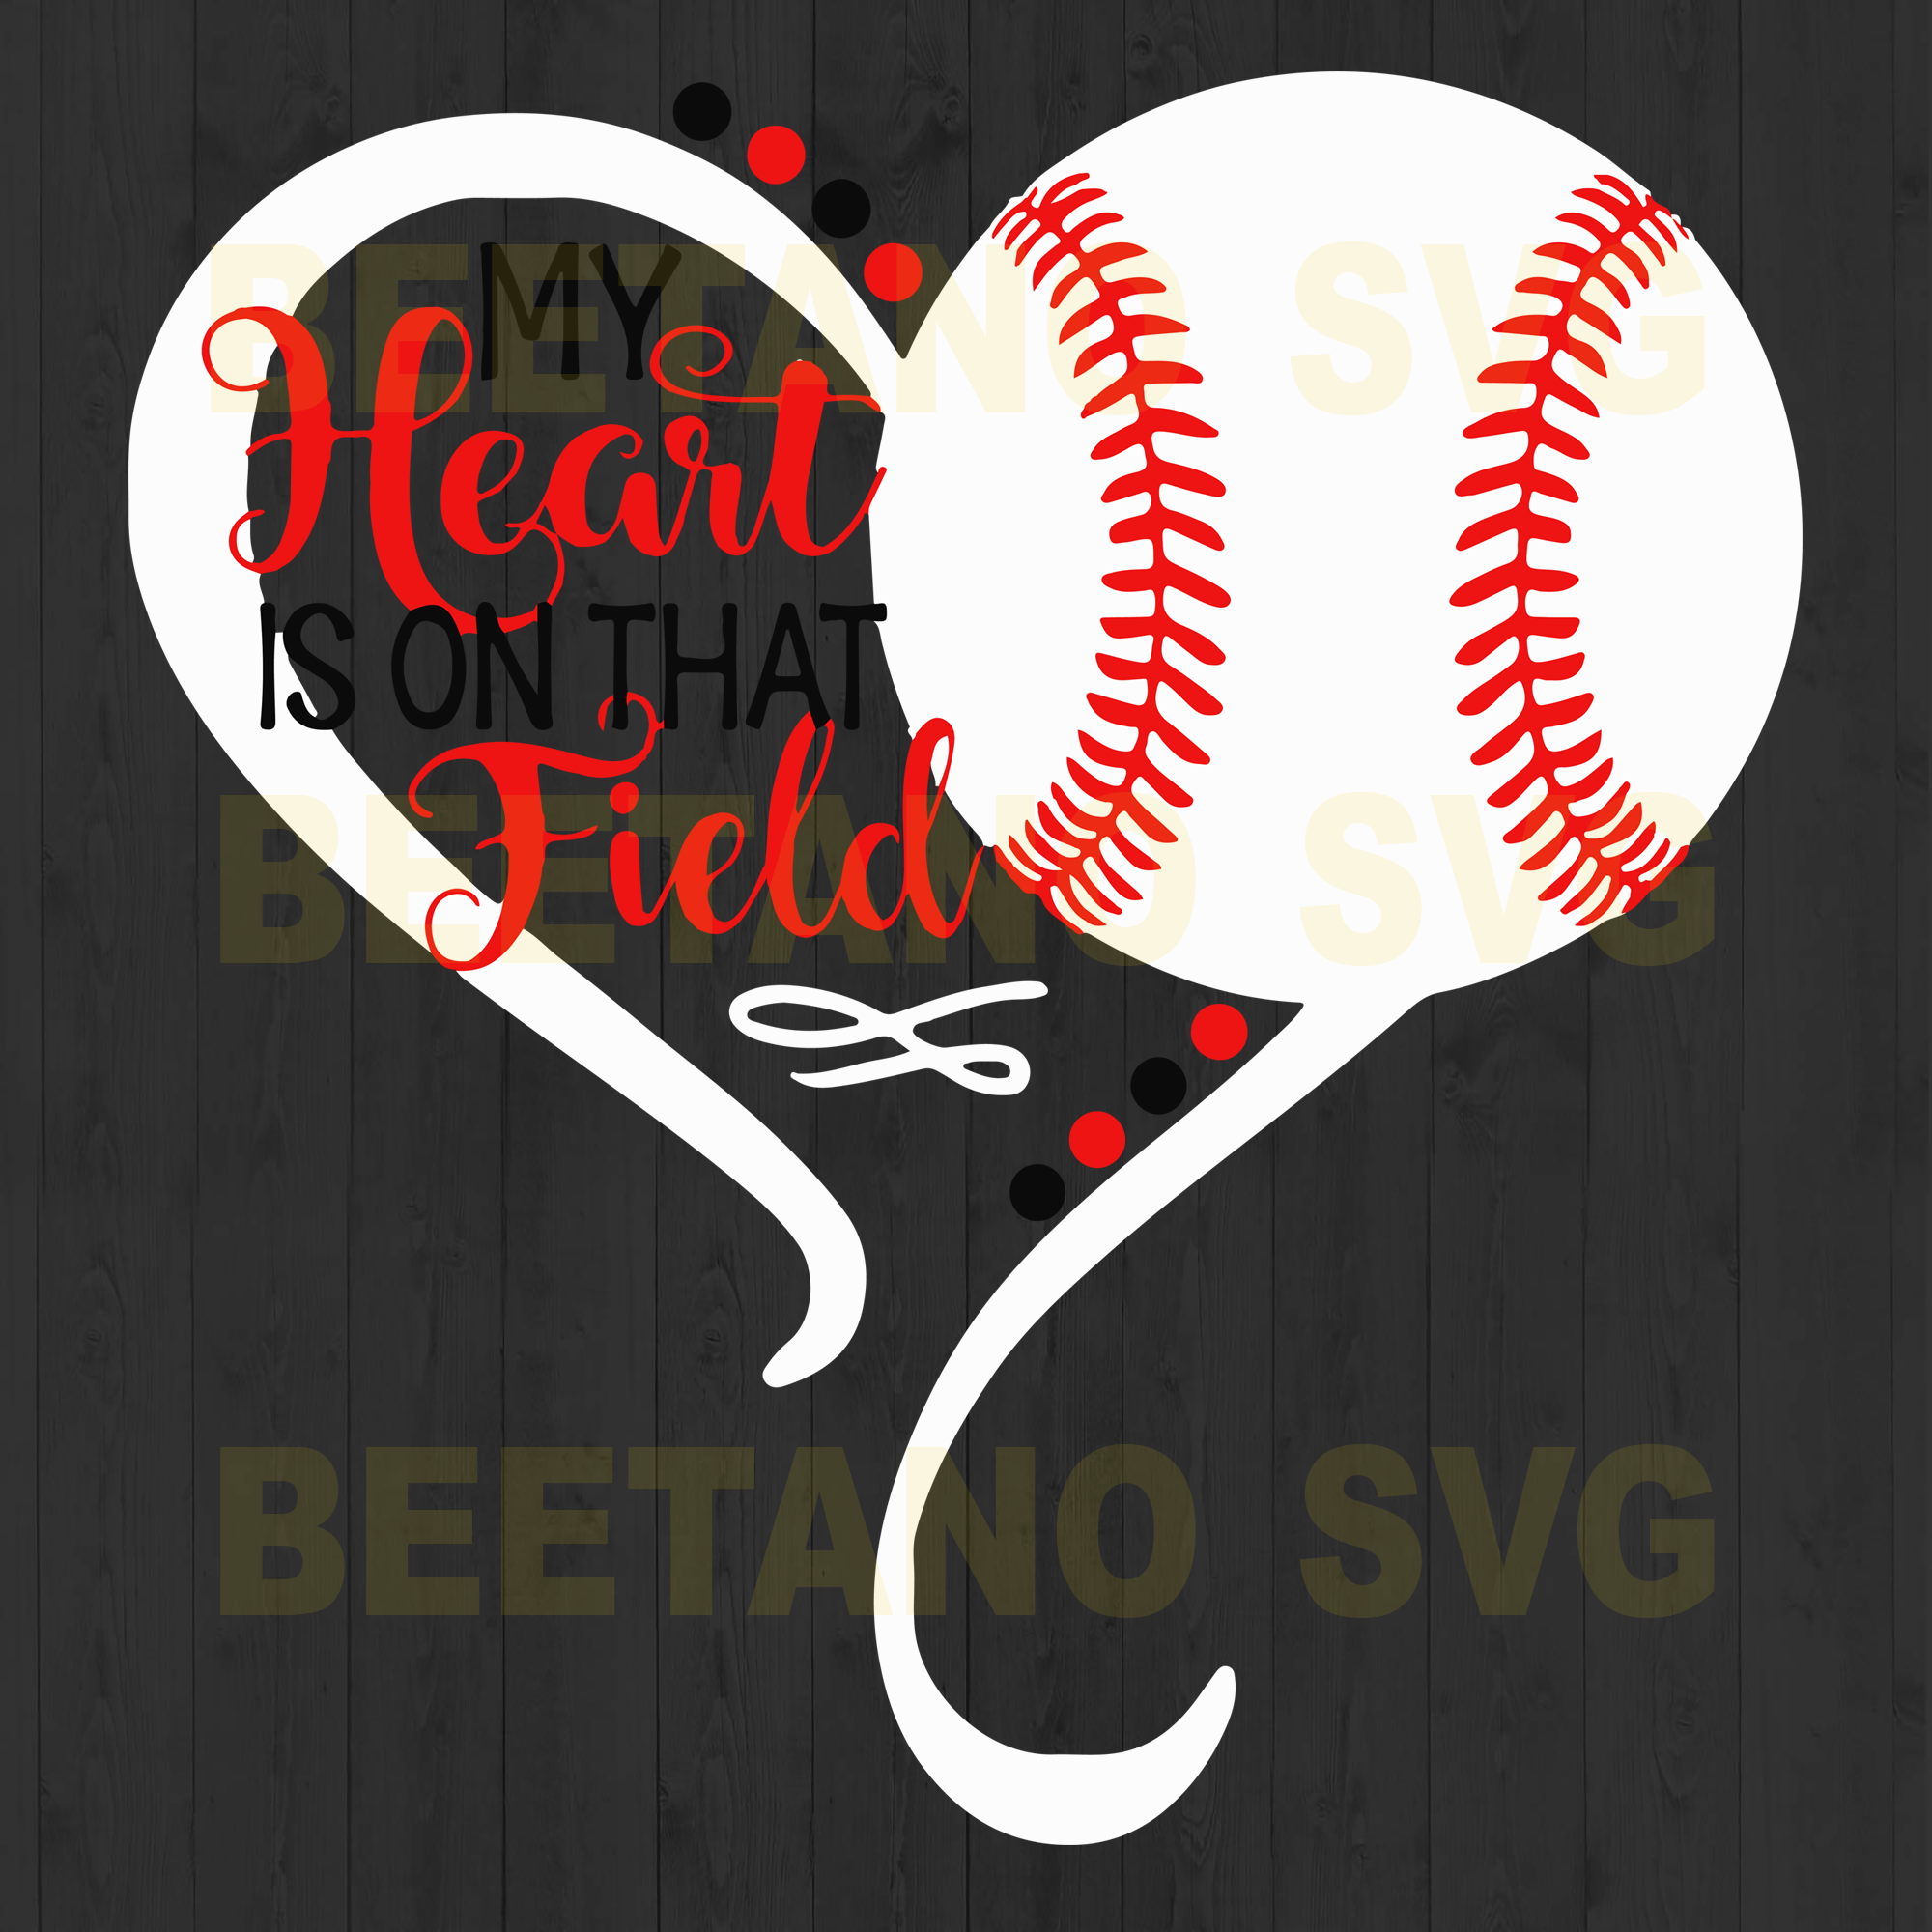 Download My Heart Is On That Field Softball Cutting Files For Cricut Svg Dxf